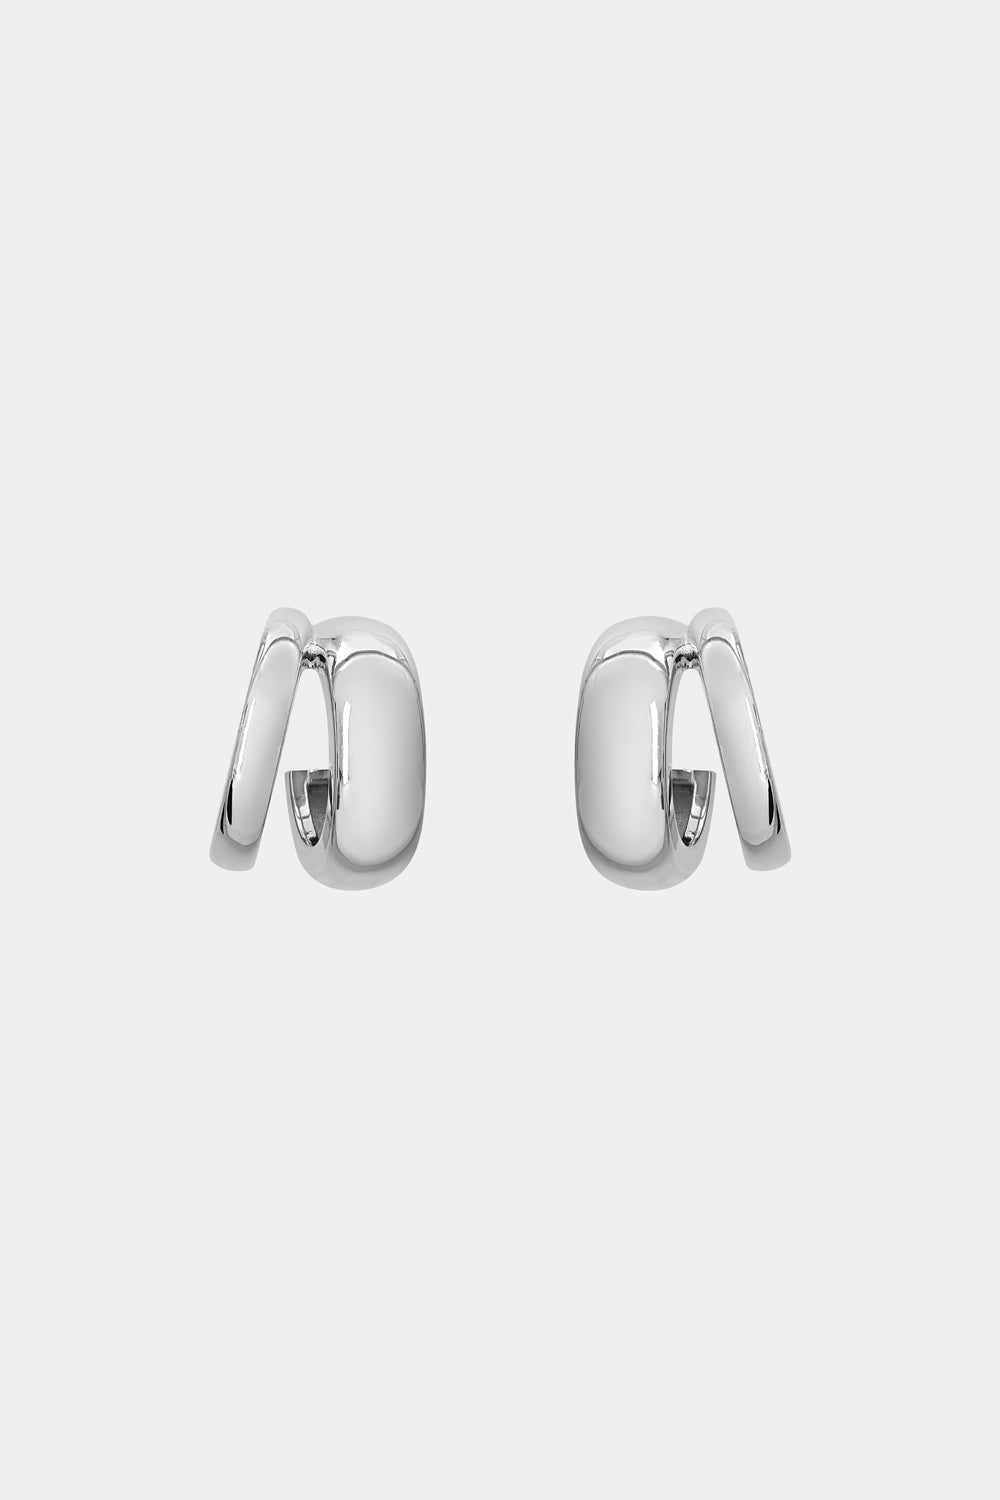 Sabine Hoops | Silver or 9K White Gold, More Options Available| Natasha Schweitzer